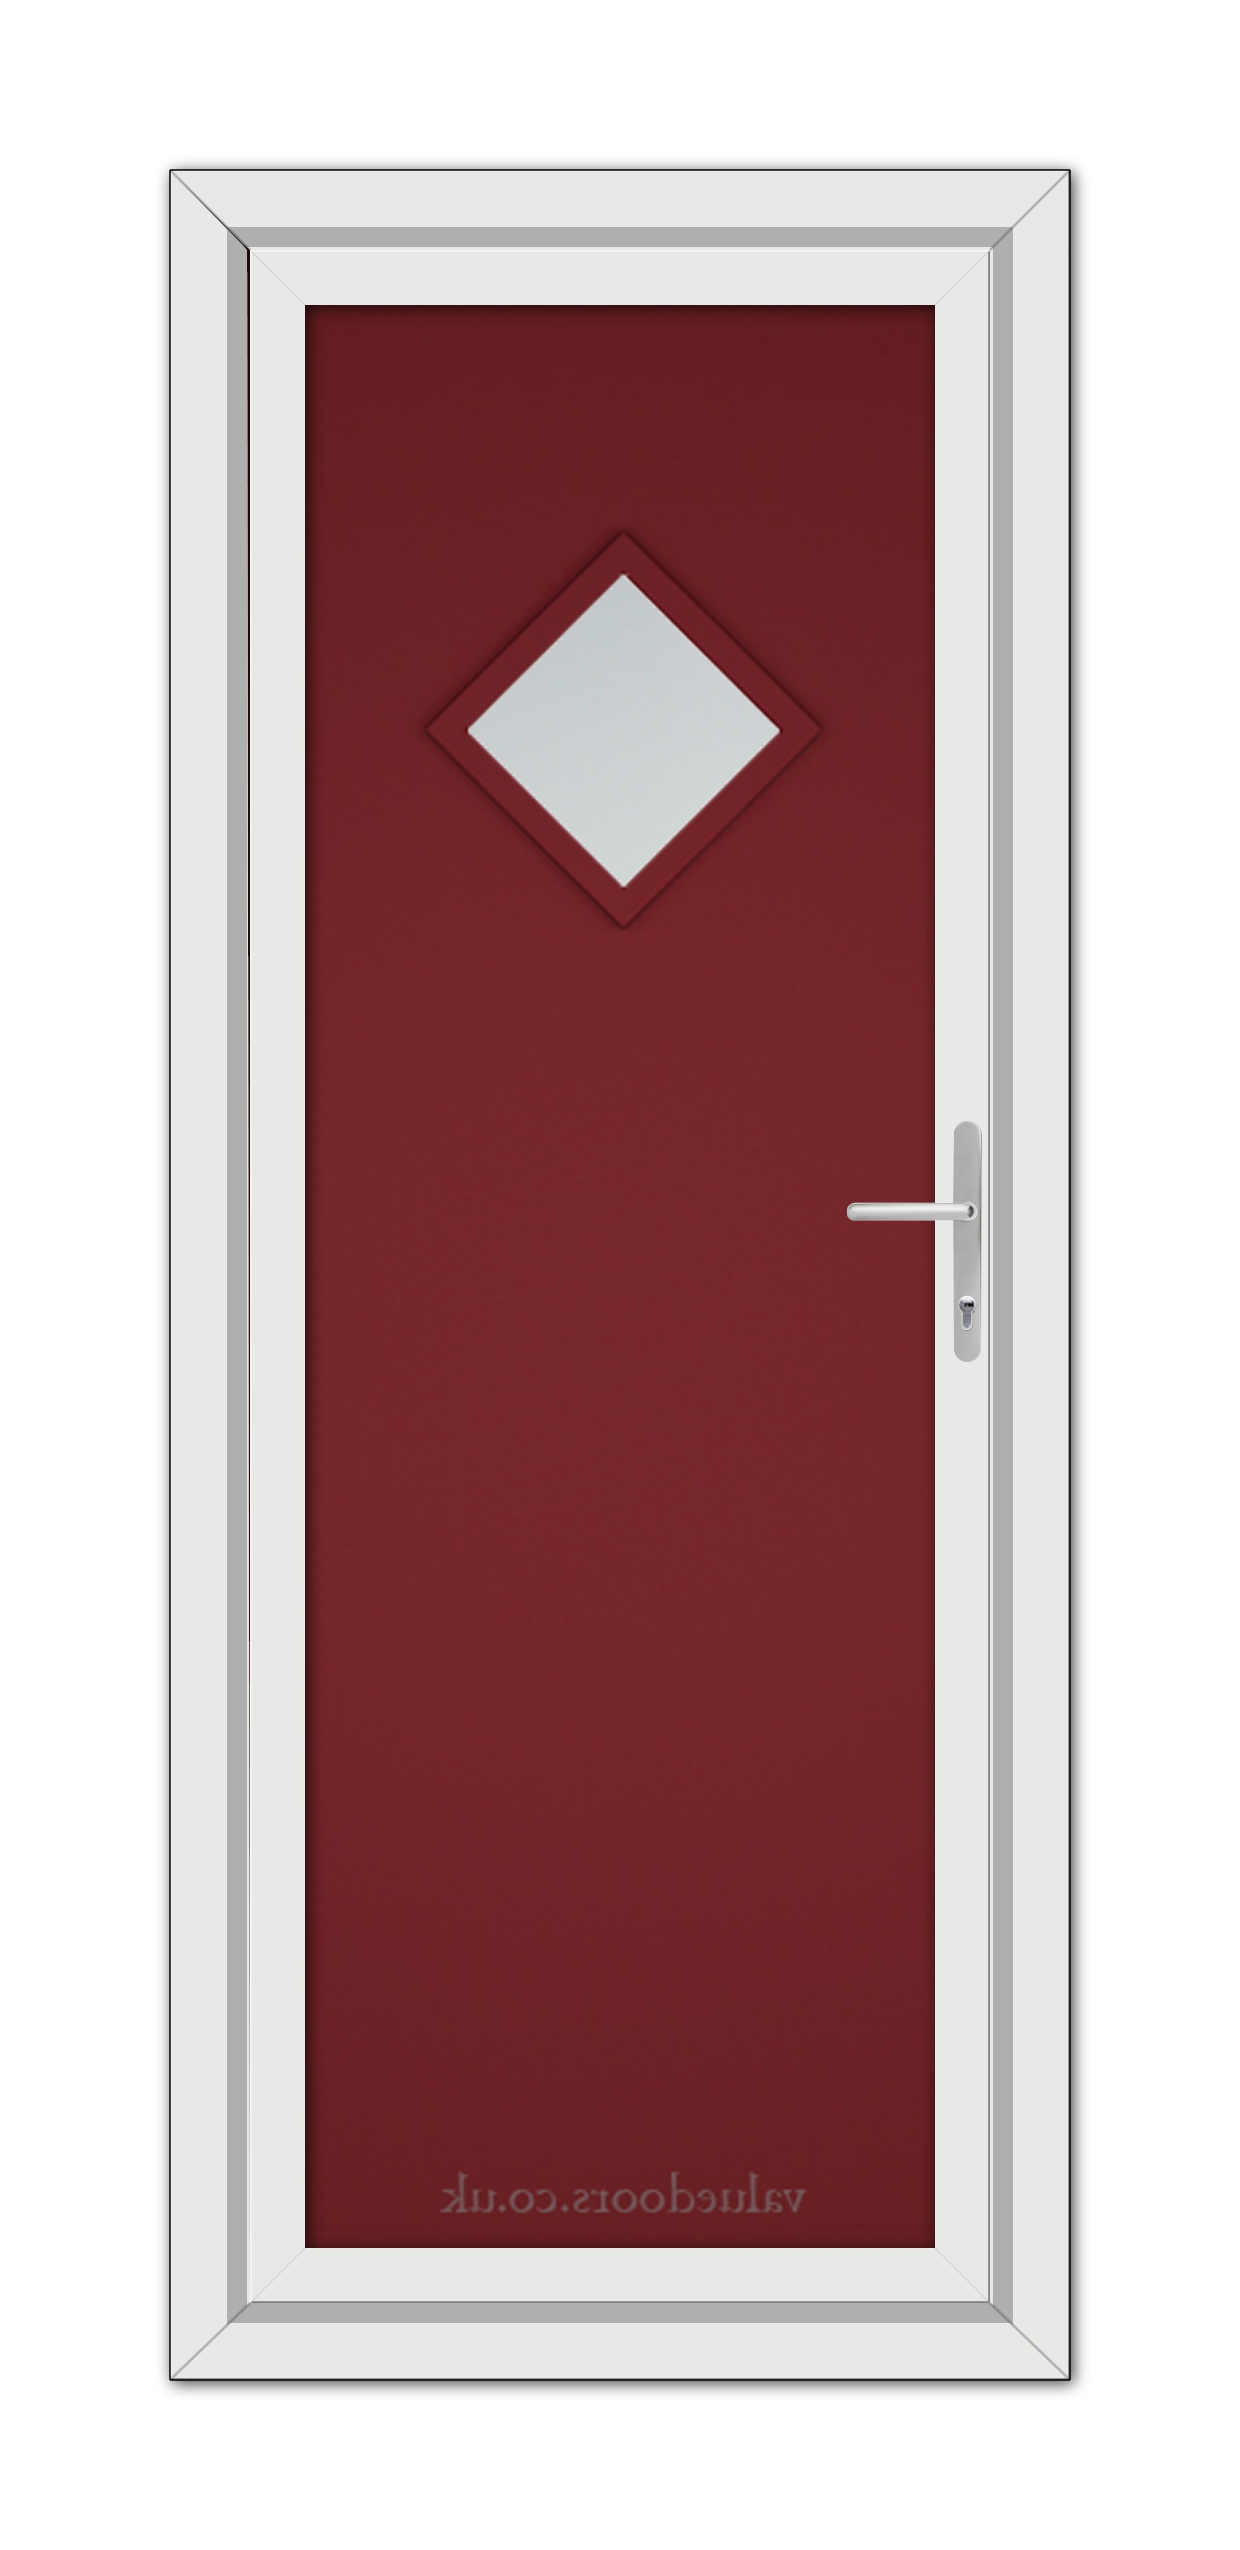 A Red Modern 5131 uPVC door with a diamond-shaped window at the center, encased in a white frame, featuring a modern handle on the right side.